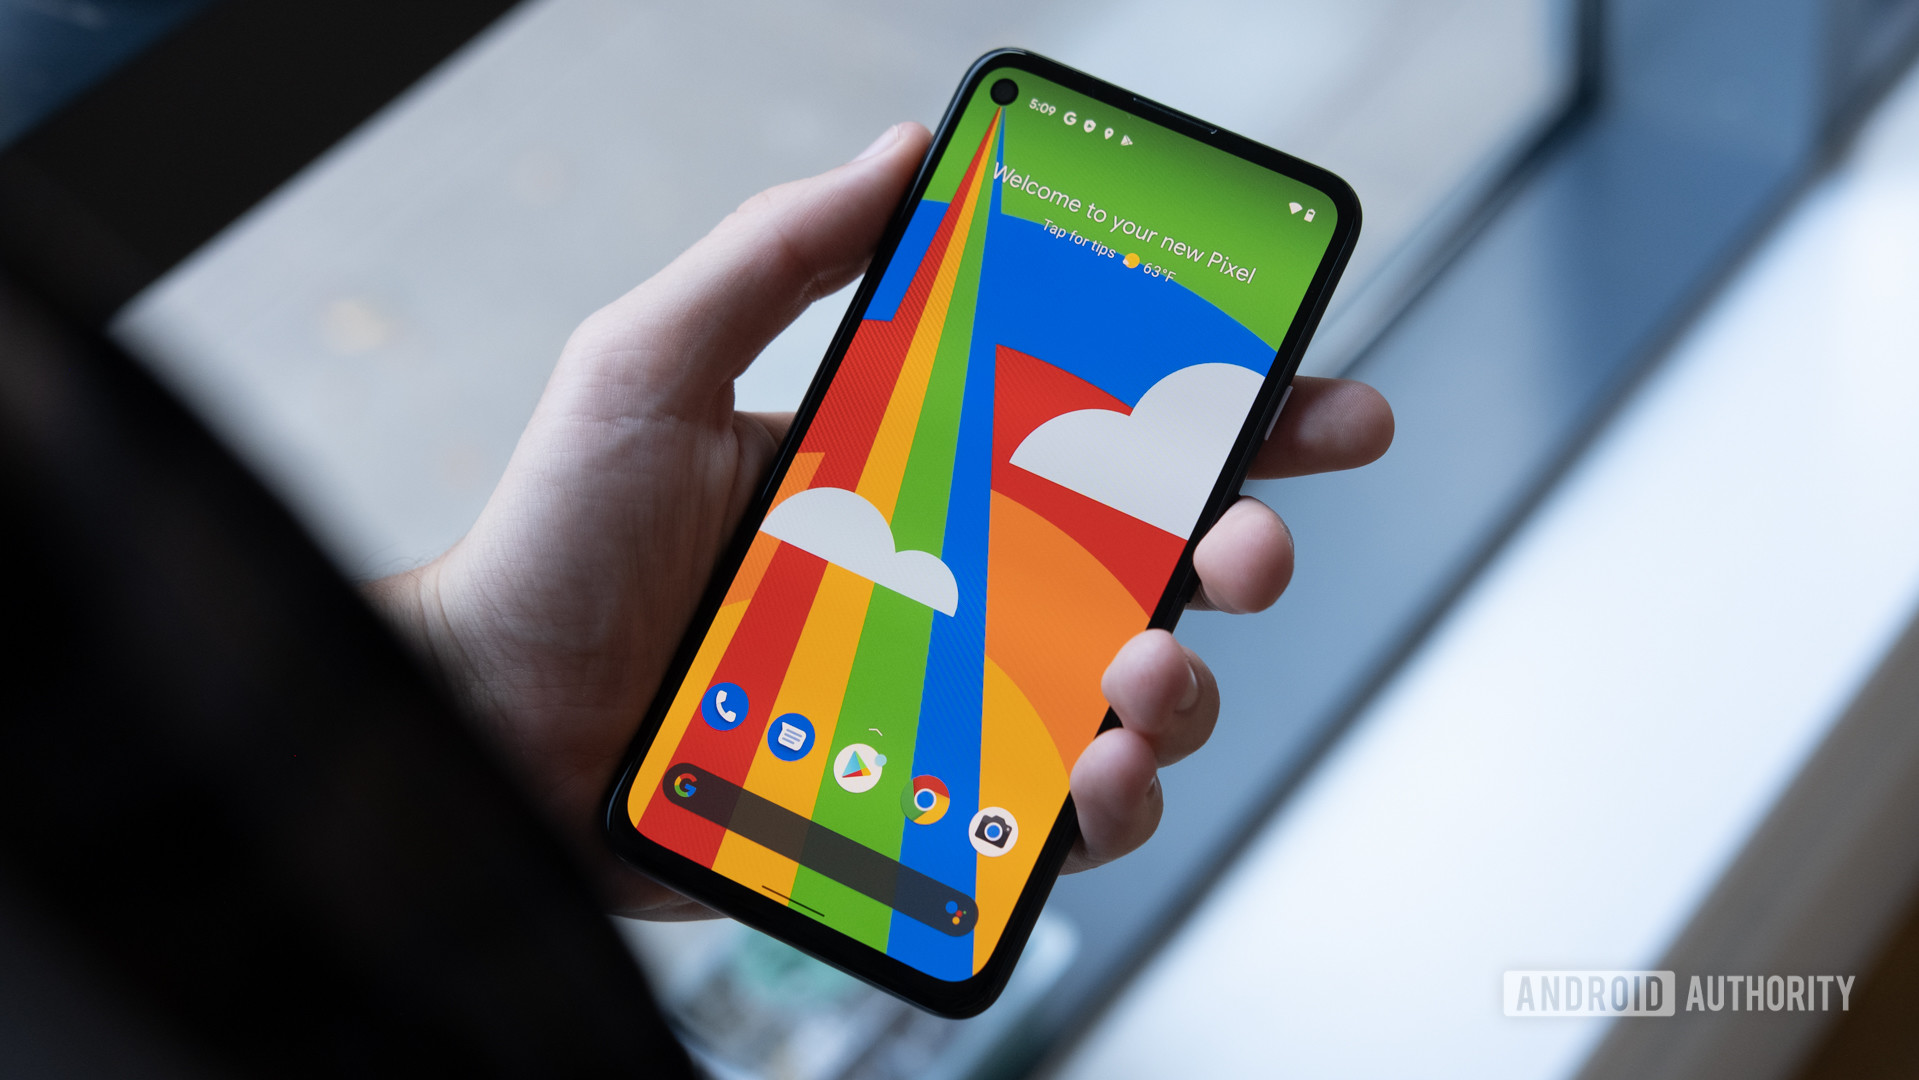 Google Pixel 4a 5G in hand showing screen.